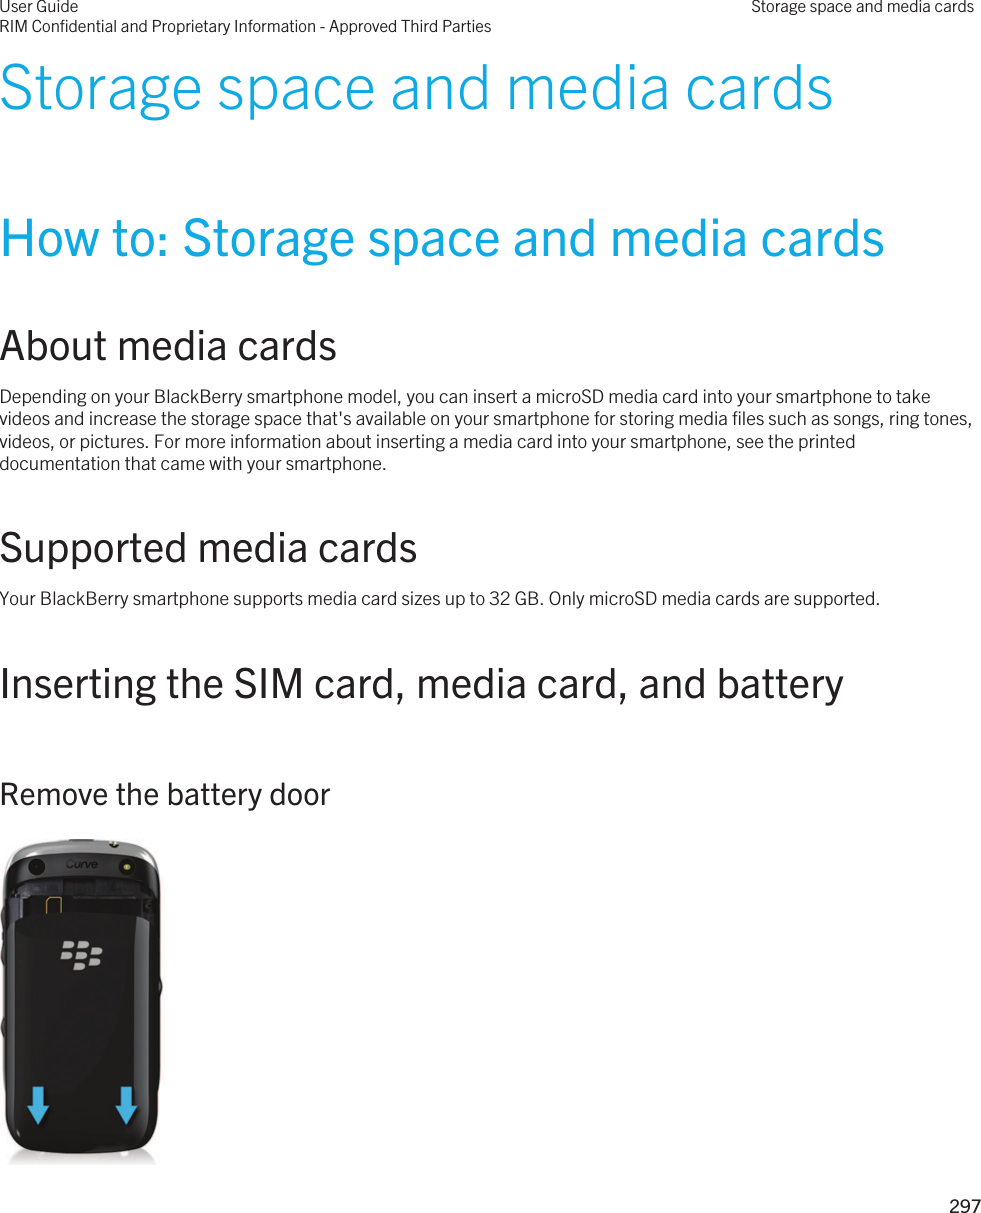 Storage space and media cardsHow to: Storage space and media cardsAbout media cardsDepending on your BlackBerry smartphone model, you can insert a microSD media card into your smartphone to take videos and increase the storage space that&apos;s available on your smartphone for storing media files such as songs, ring tones, videos, or pictures. For more information about inserting a media card into your smartphone, see the printed documentation that came with your smartphone.Supported media cardsYour BlackBerry smartphone supports media card sizes up to 32 GB. Only microSD media cards are supported.Inserting the SIM card, media card, and batteryRemove the battery door User GuideRIM Confidential and Proprietary Information - Approved Third PartiesStorage space and media cards297 